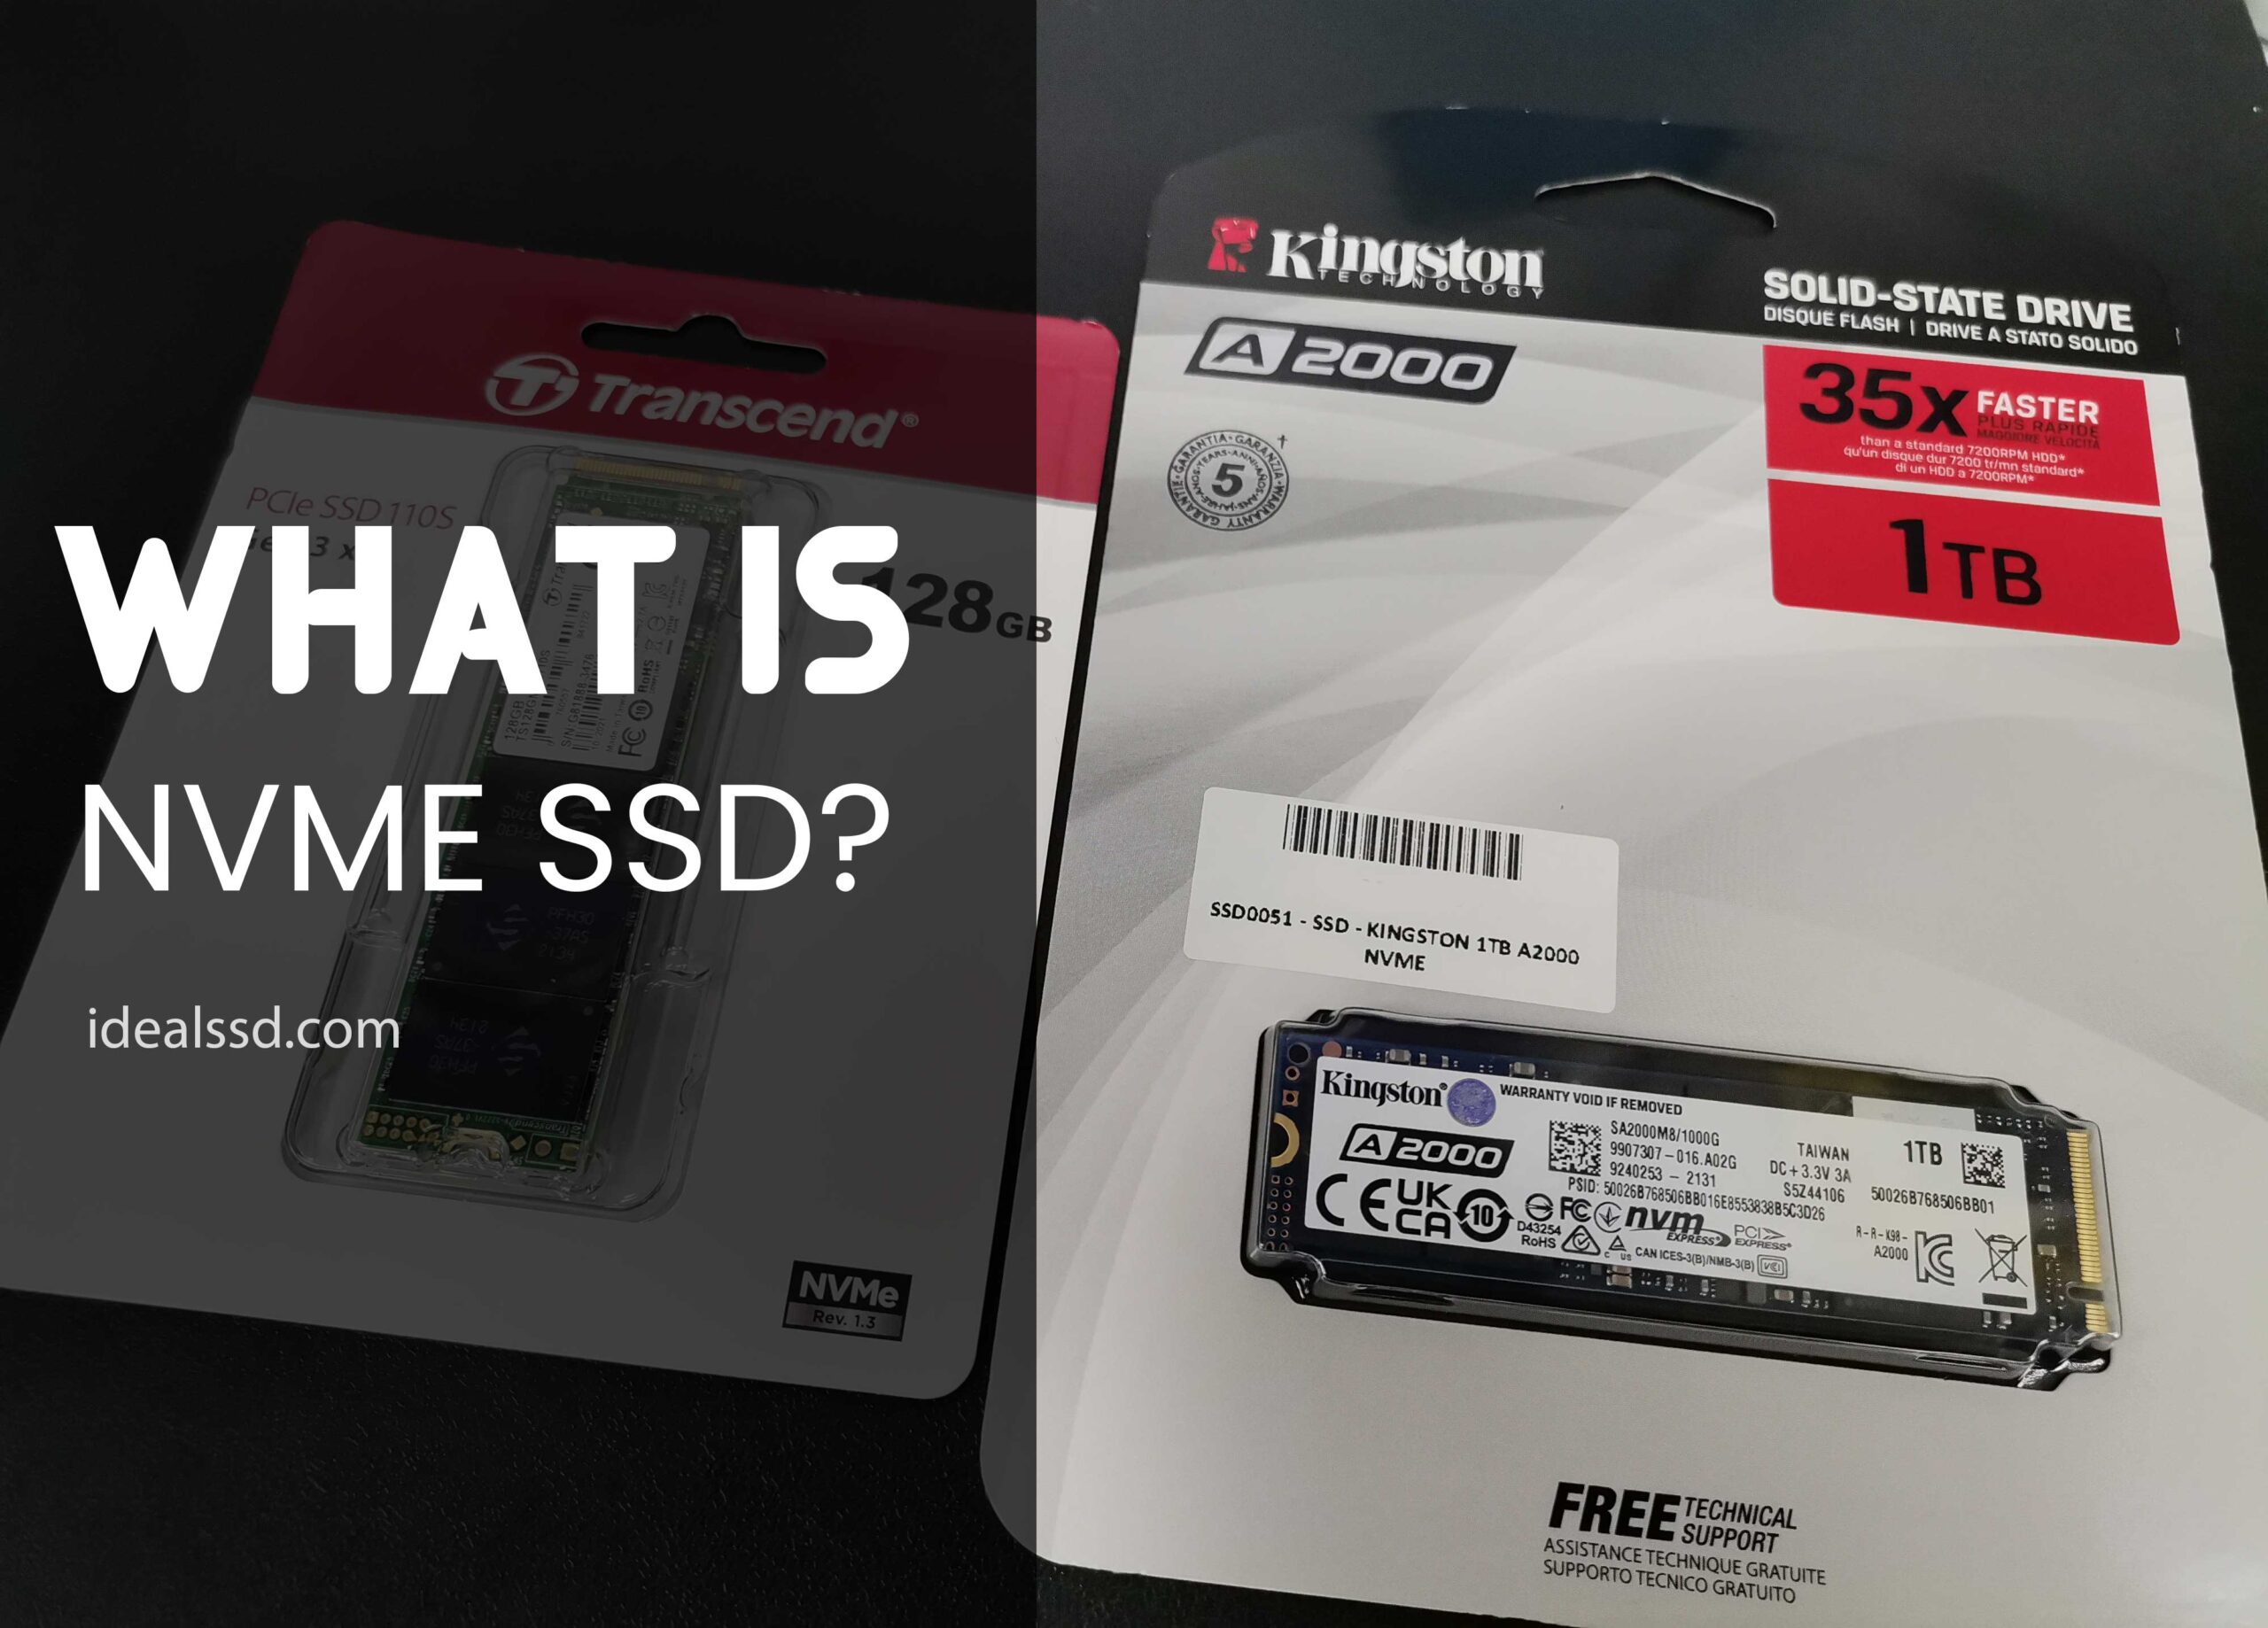 What Is NVME SSD? The Future of Solid State Drives